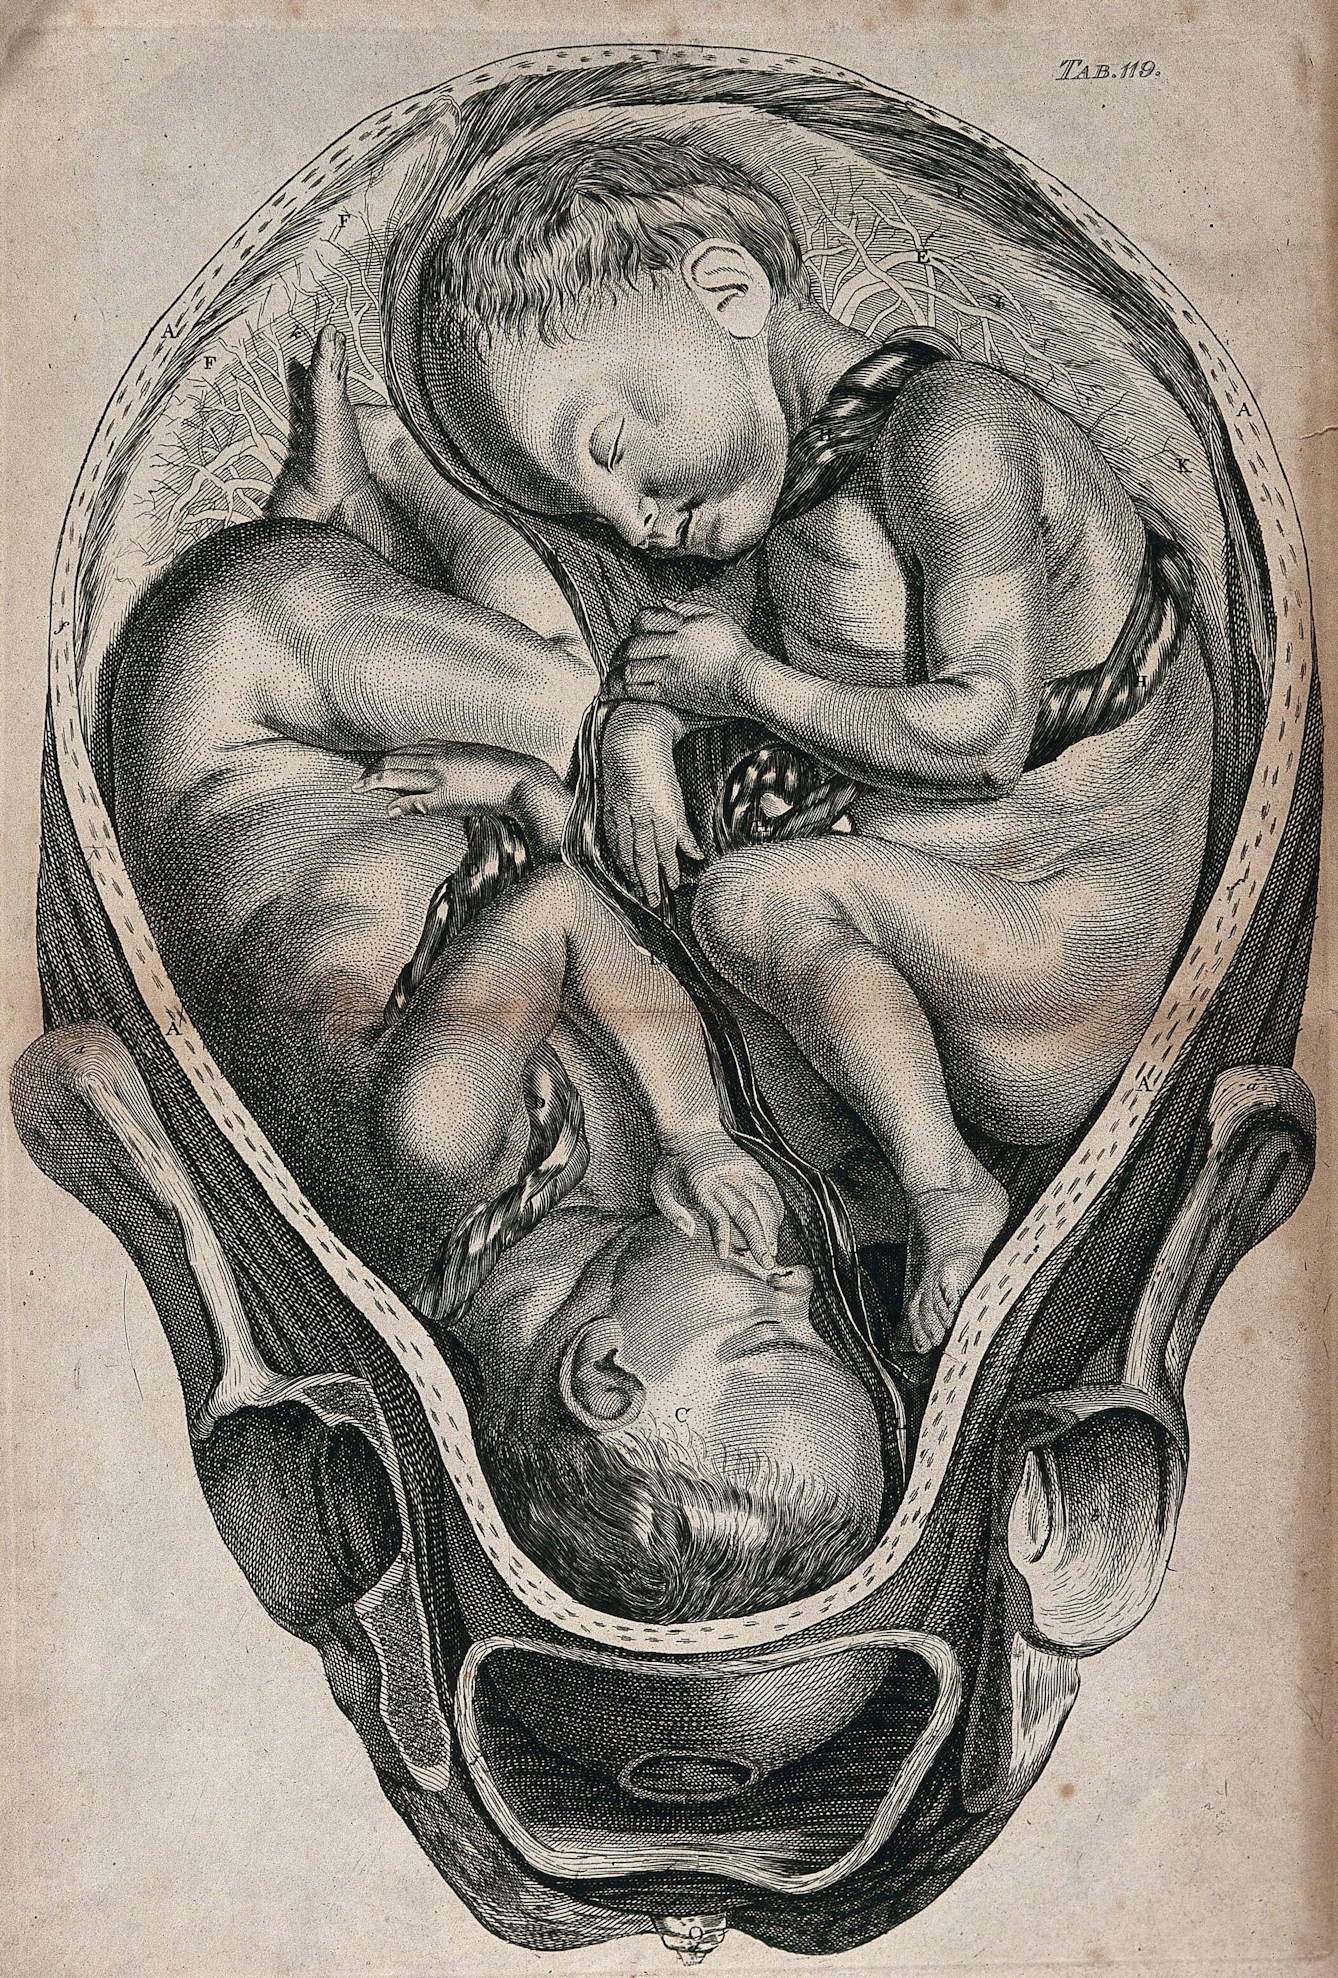 A line engraving print of a cutaway uterus showing two babies lying head-to-toe inside with umbilical cords entwined around the. The babies are almost at full term and have hair and the appearance of being asleep.